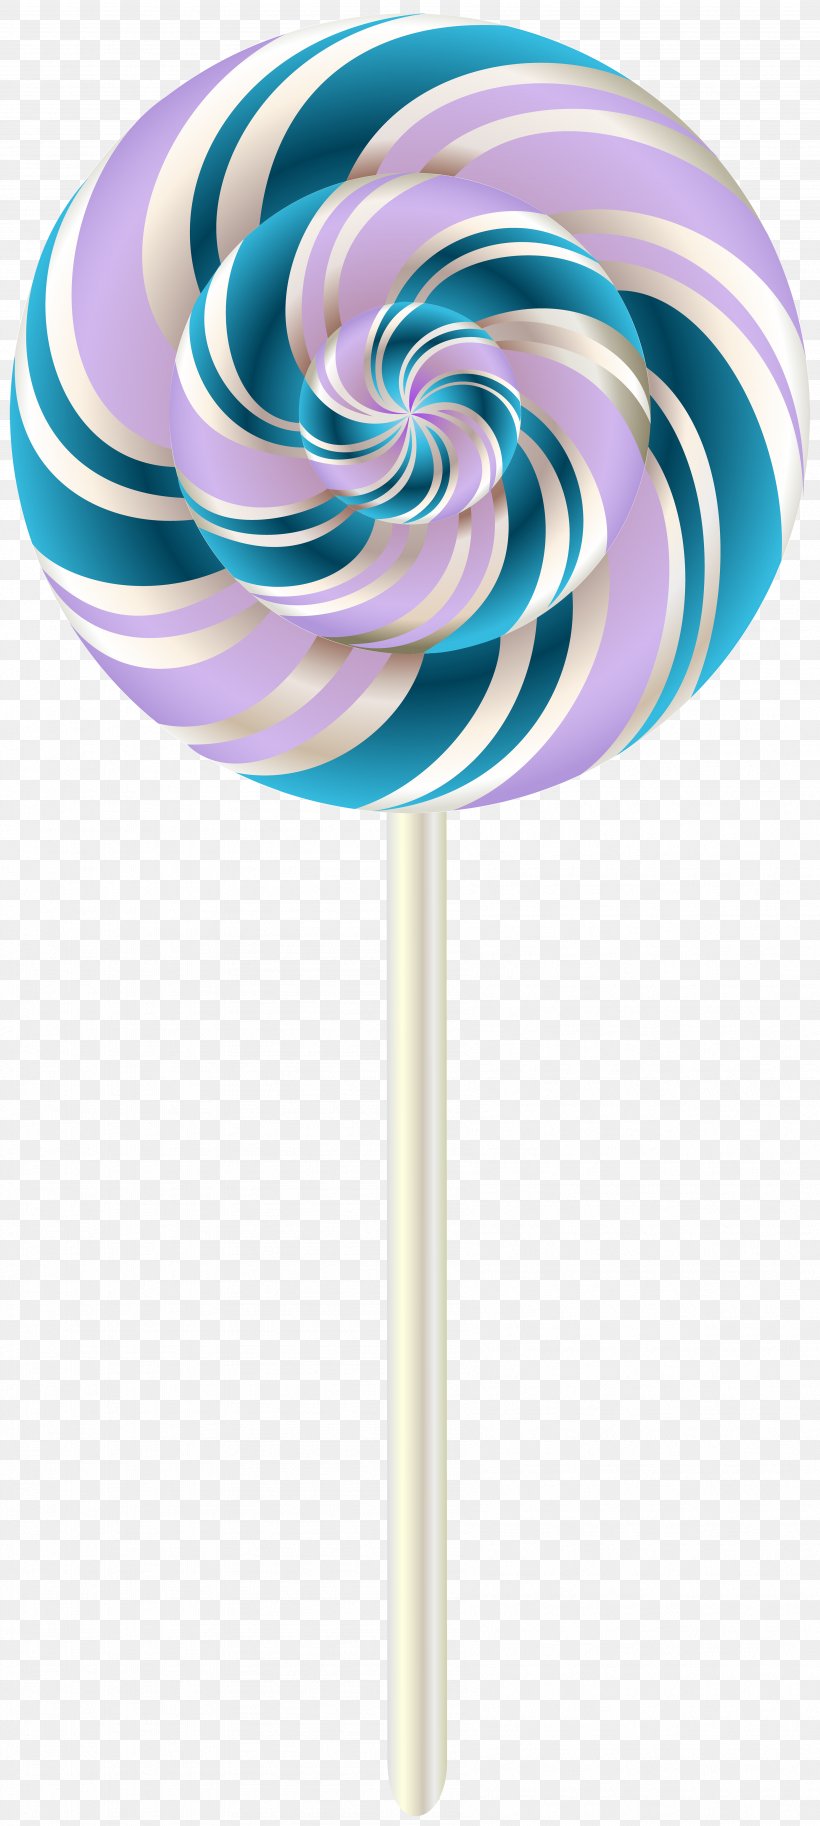 Lollipop Stick Candy Clip Art, PNG, 3591x8000px, Lollipop, Animation, Blog, Candy, Confectionery Download Free